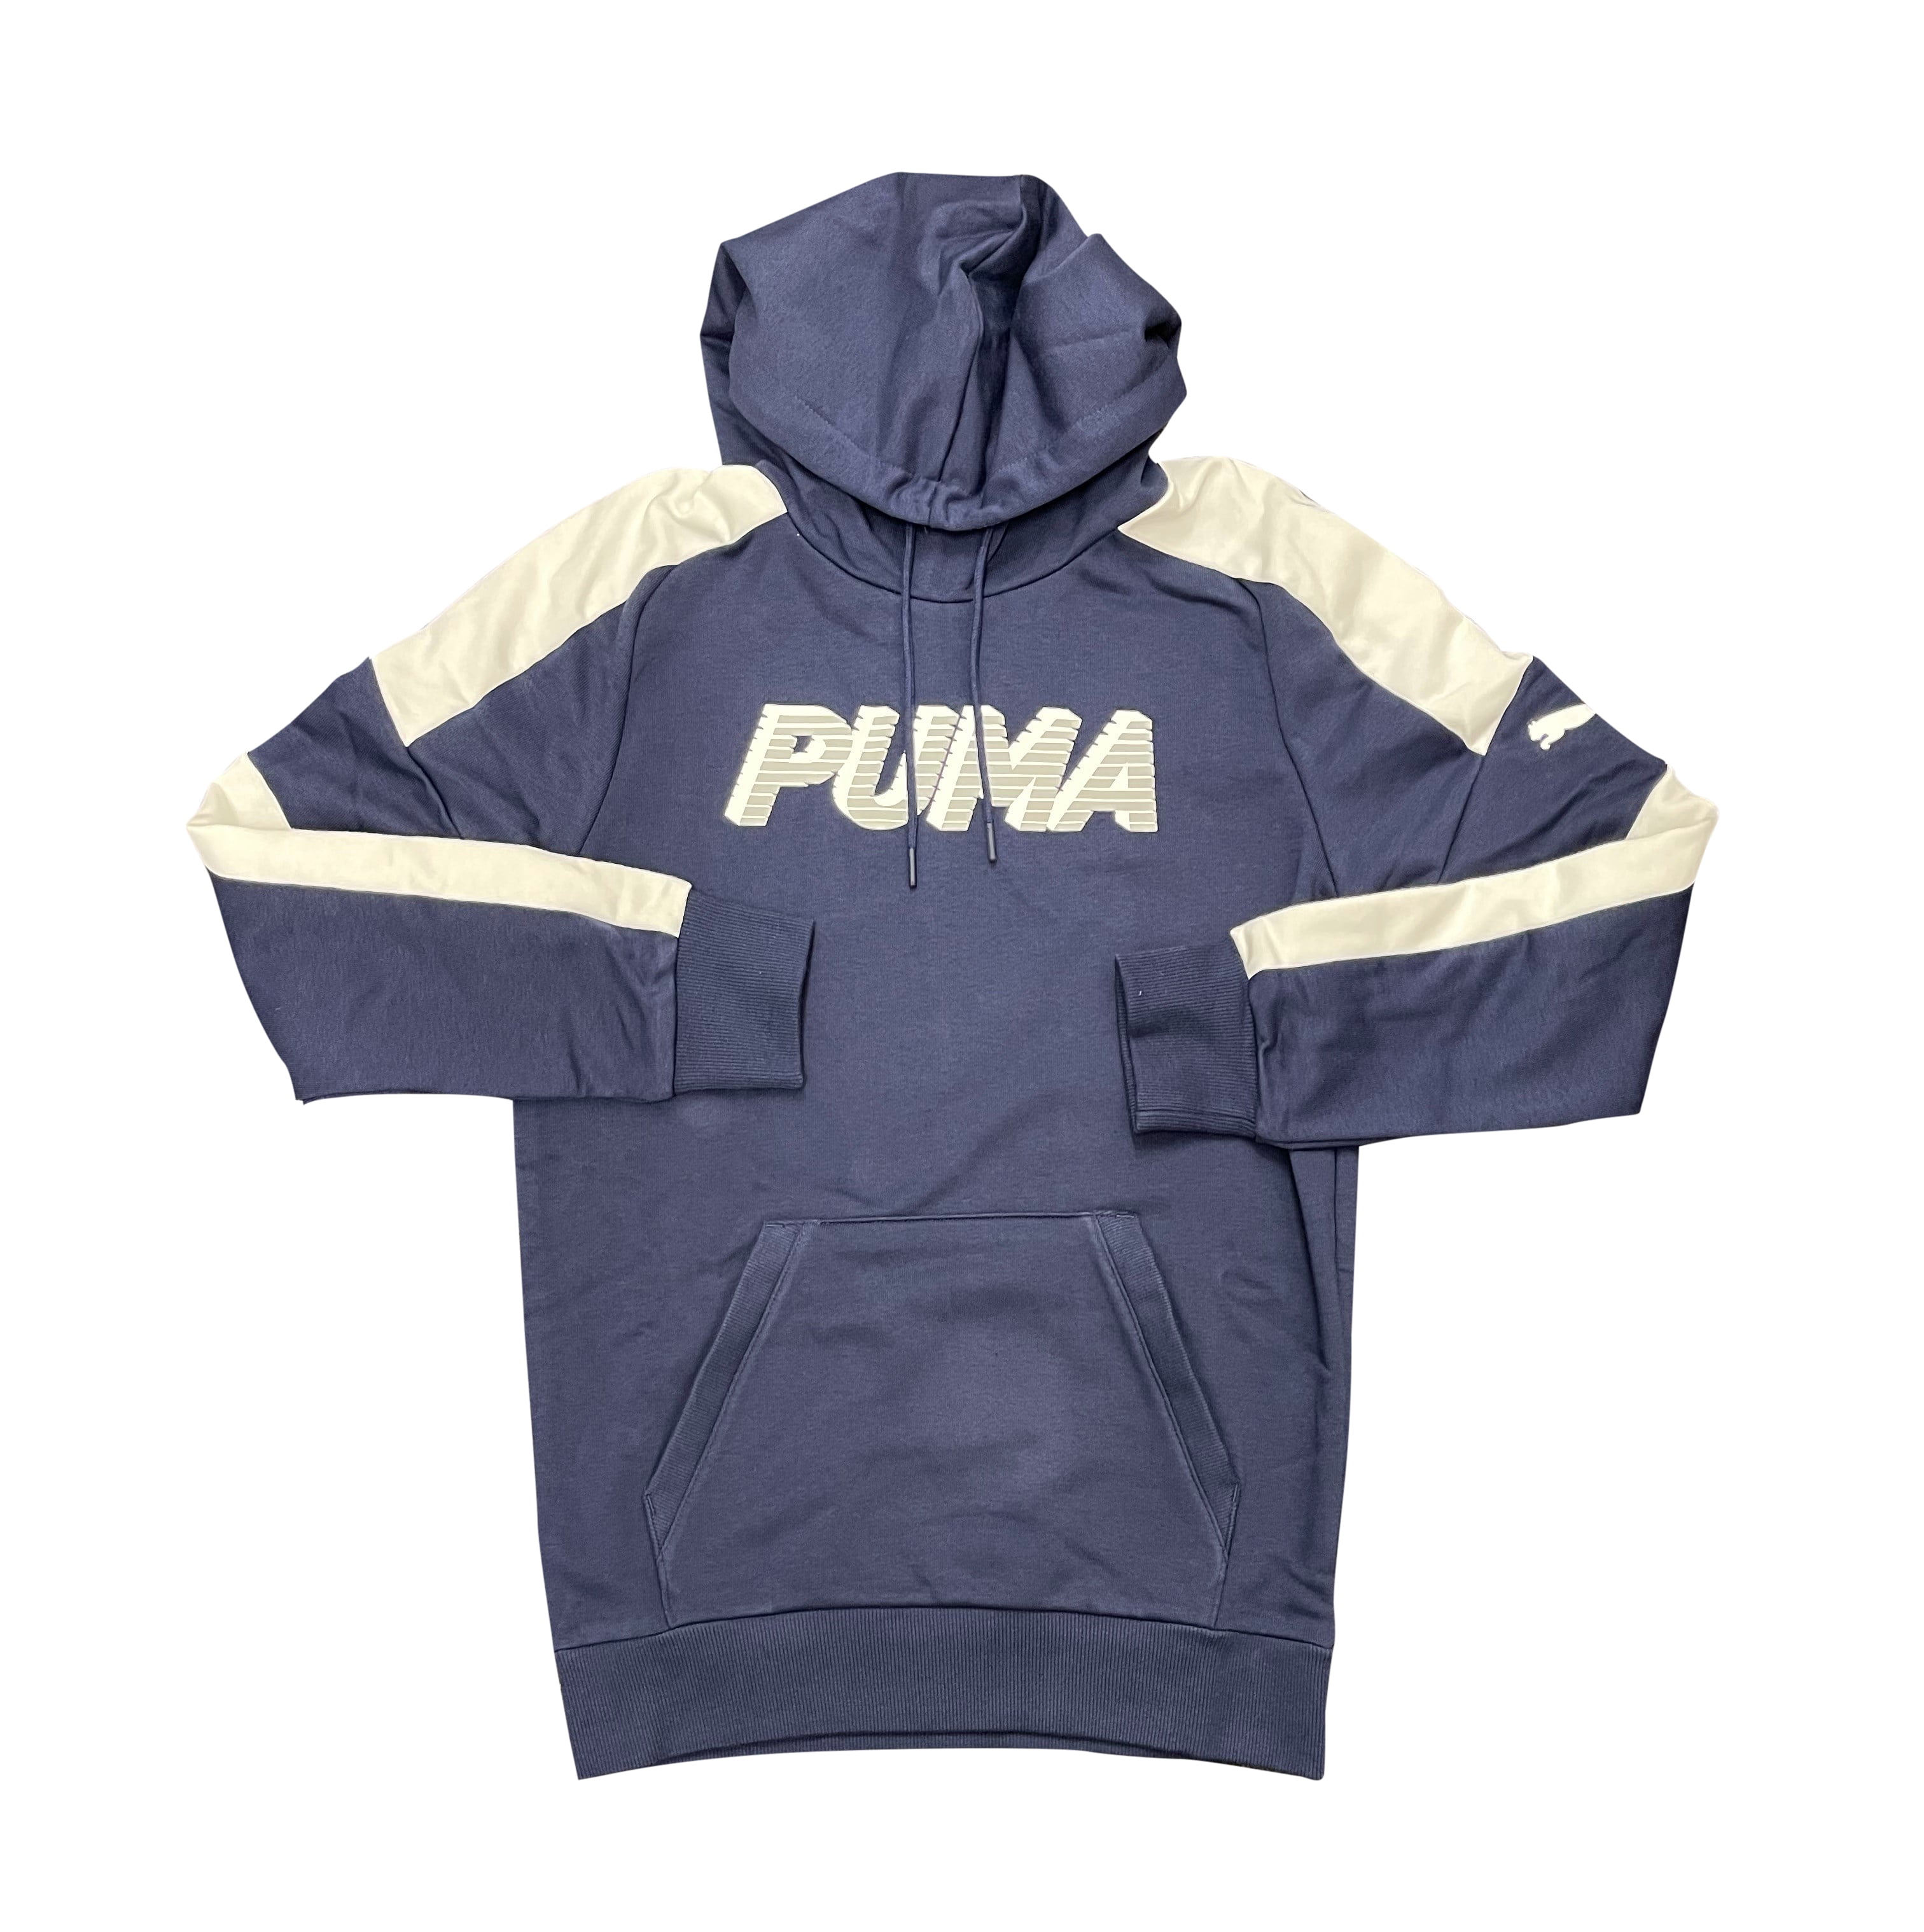 Buy PUMA Men Cotton Sports Jackets & Sweatshirts Grey Online at Low Prices  in India - Paytmmall.com